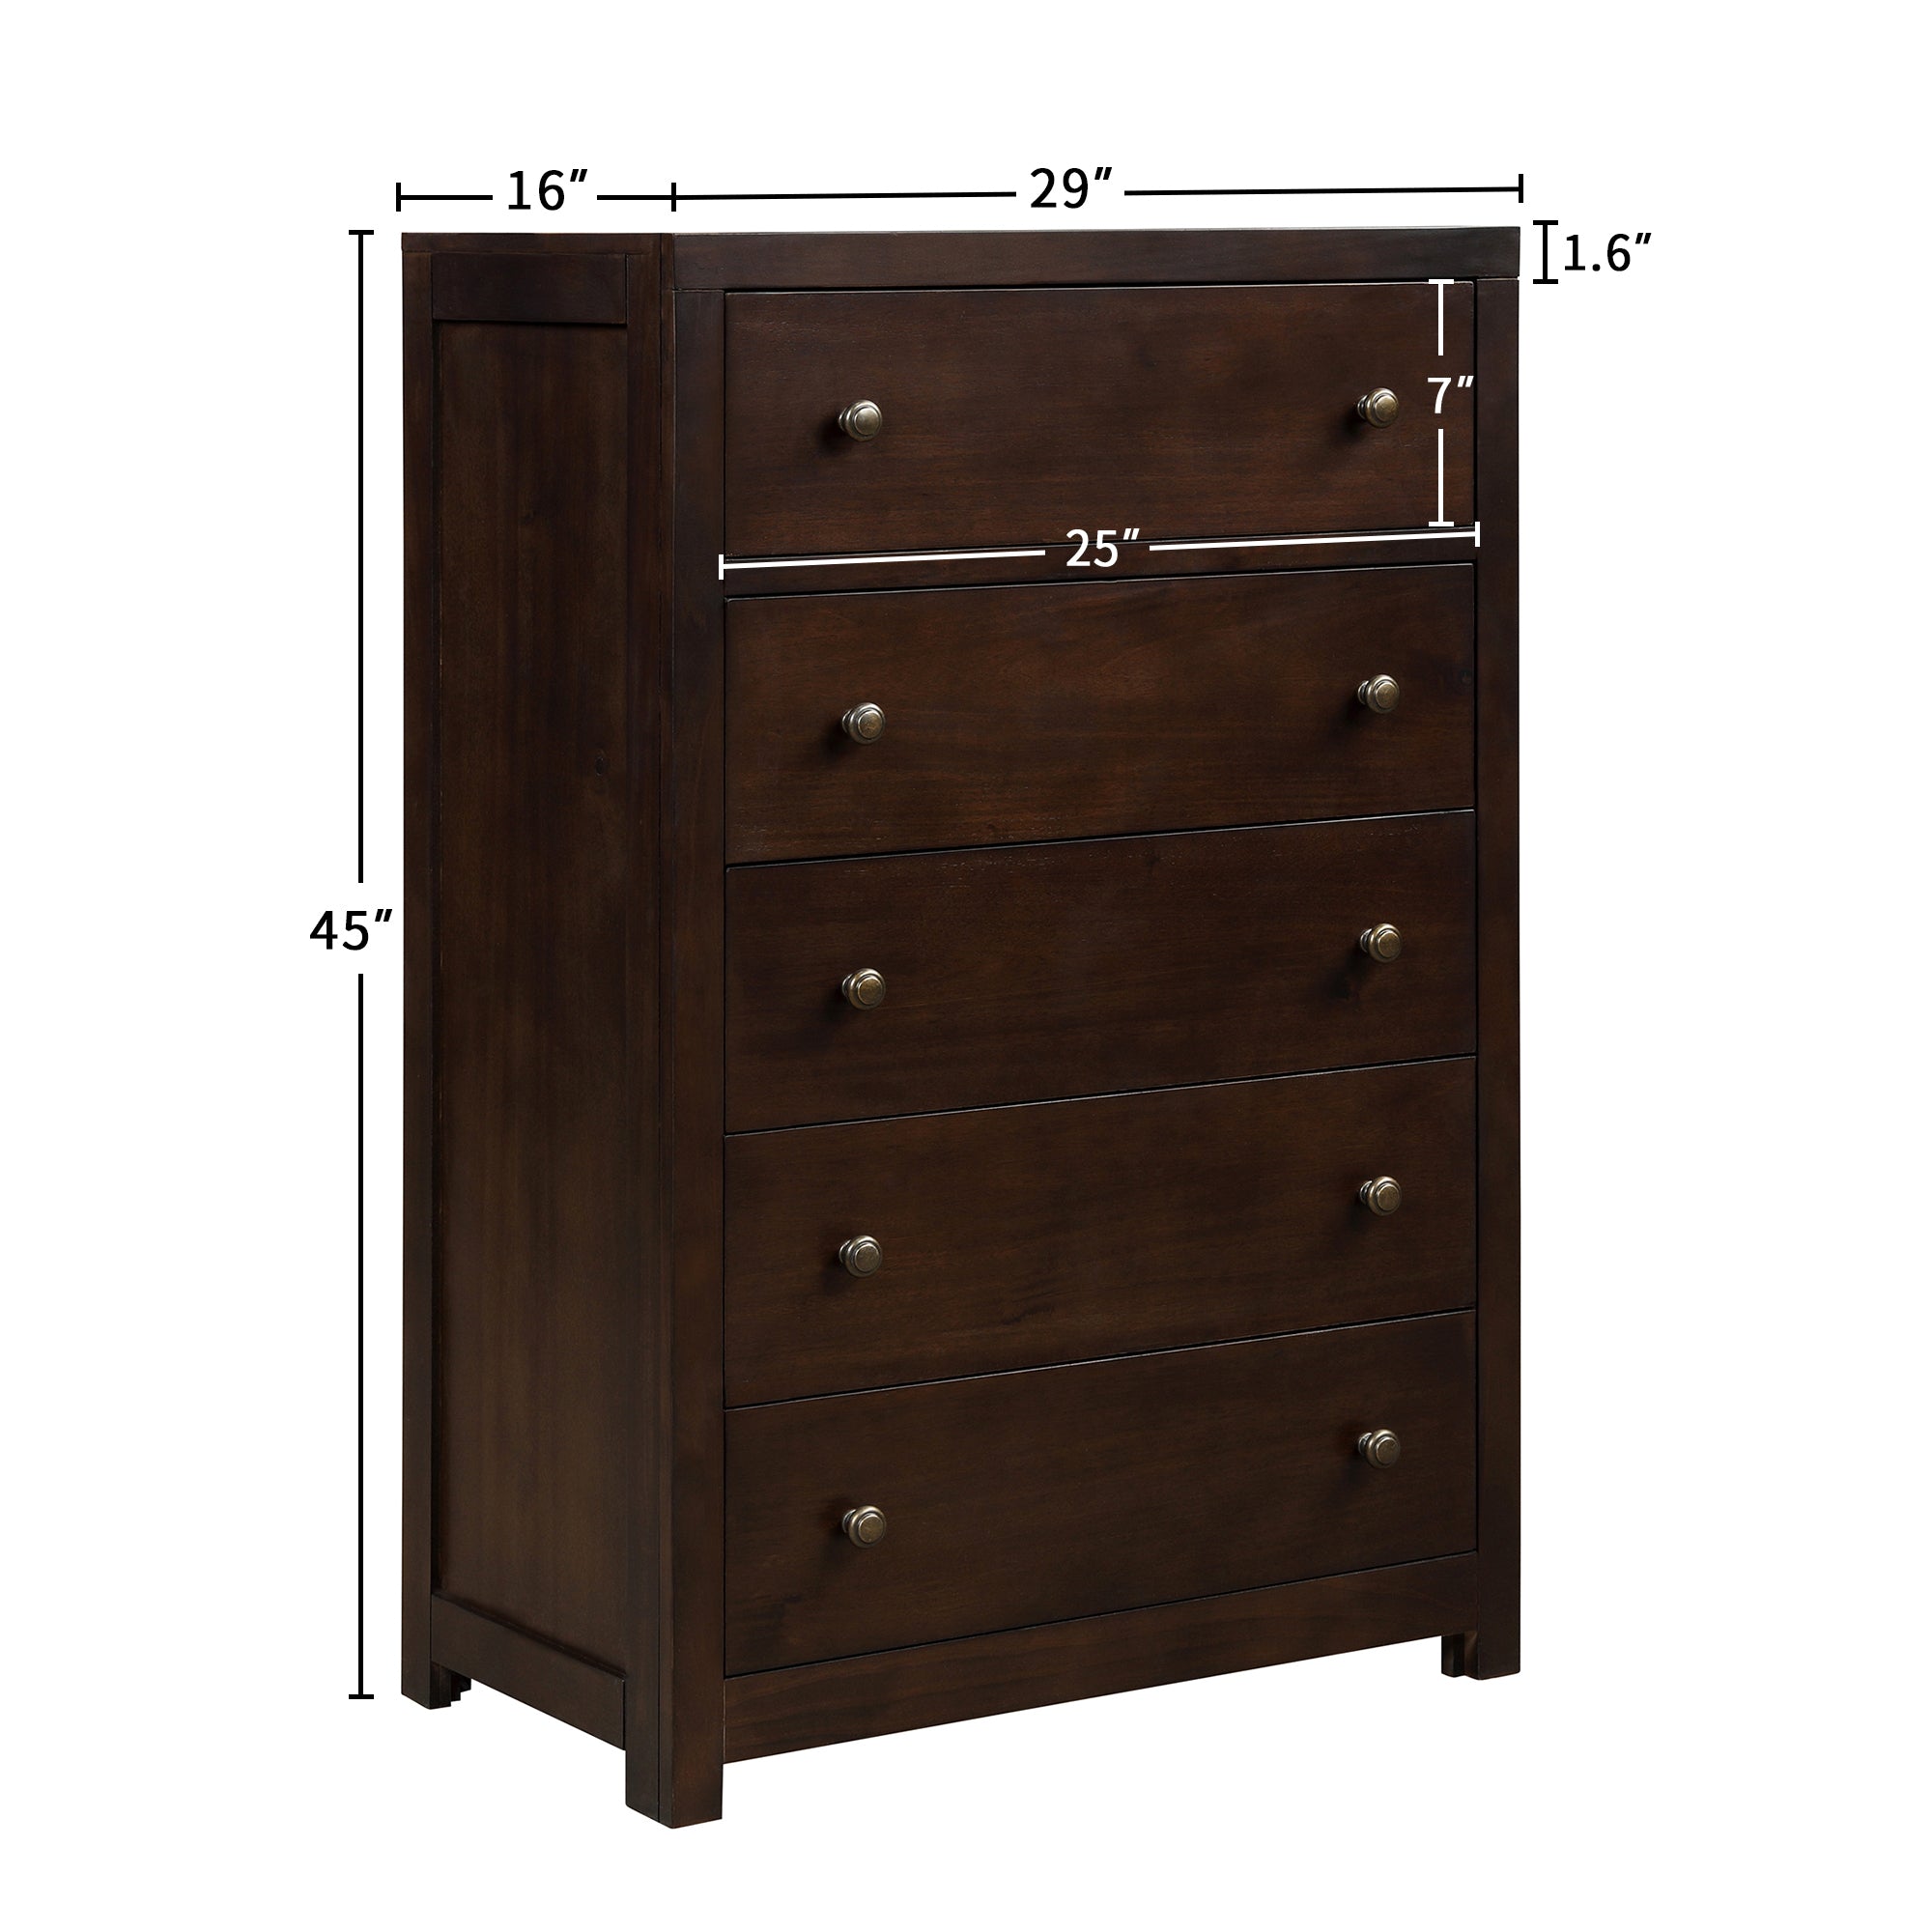 5 Drawers Solid Wood Chest (Brown)